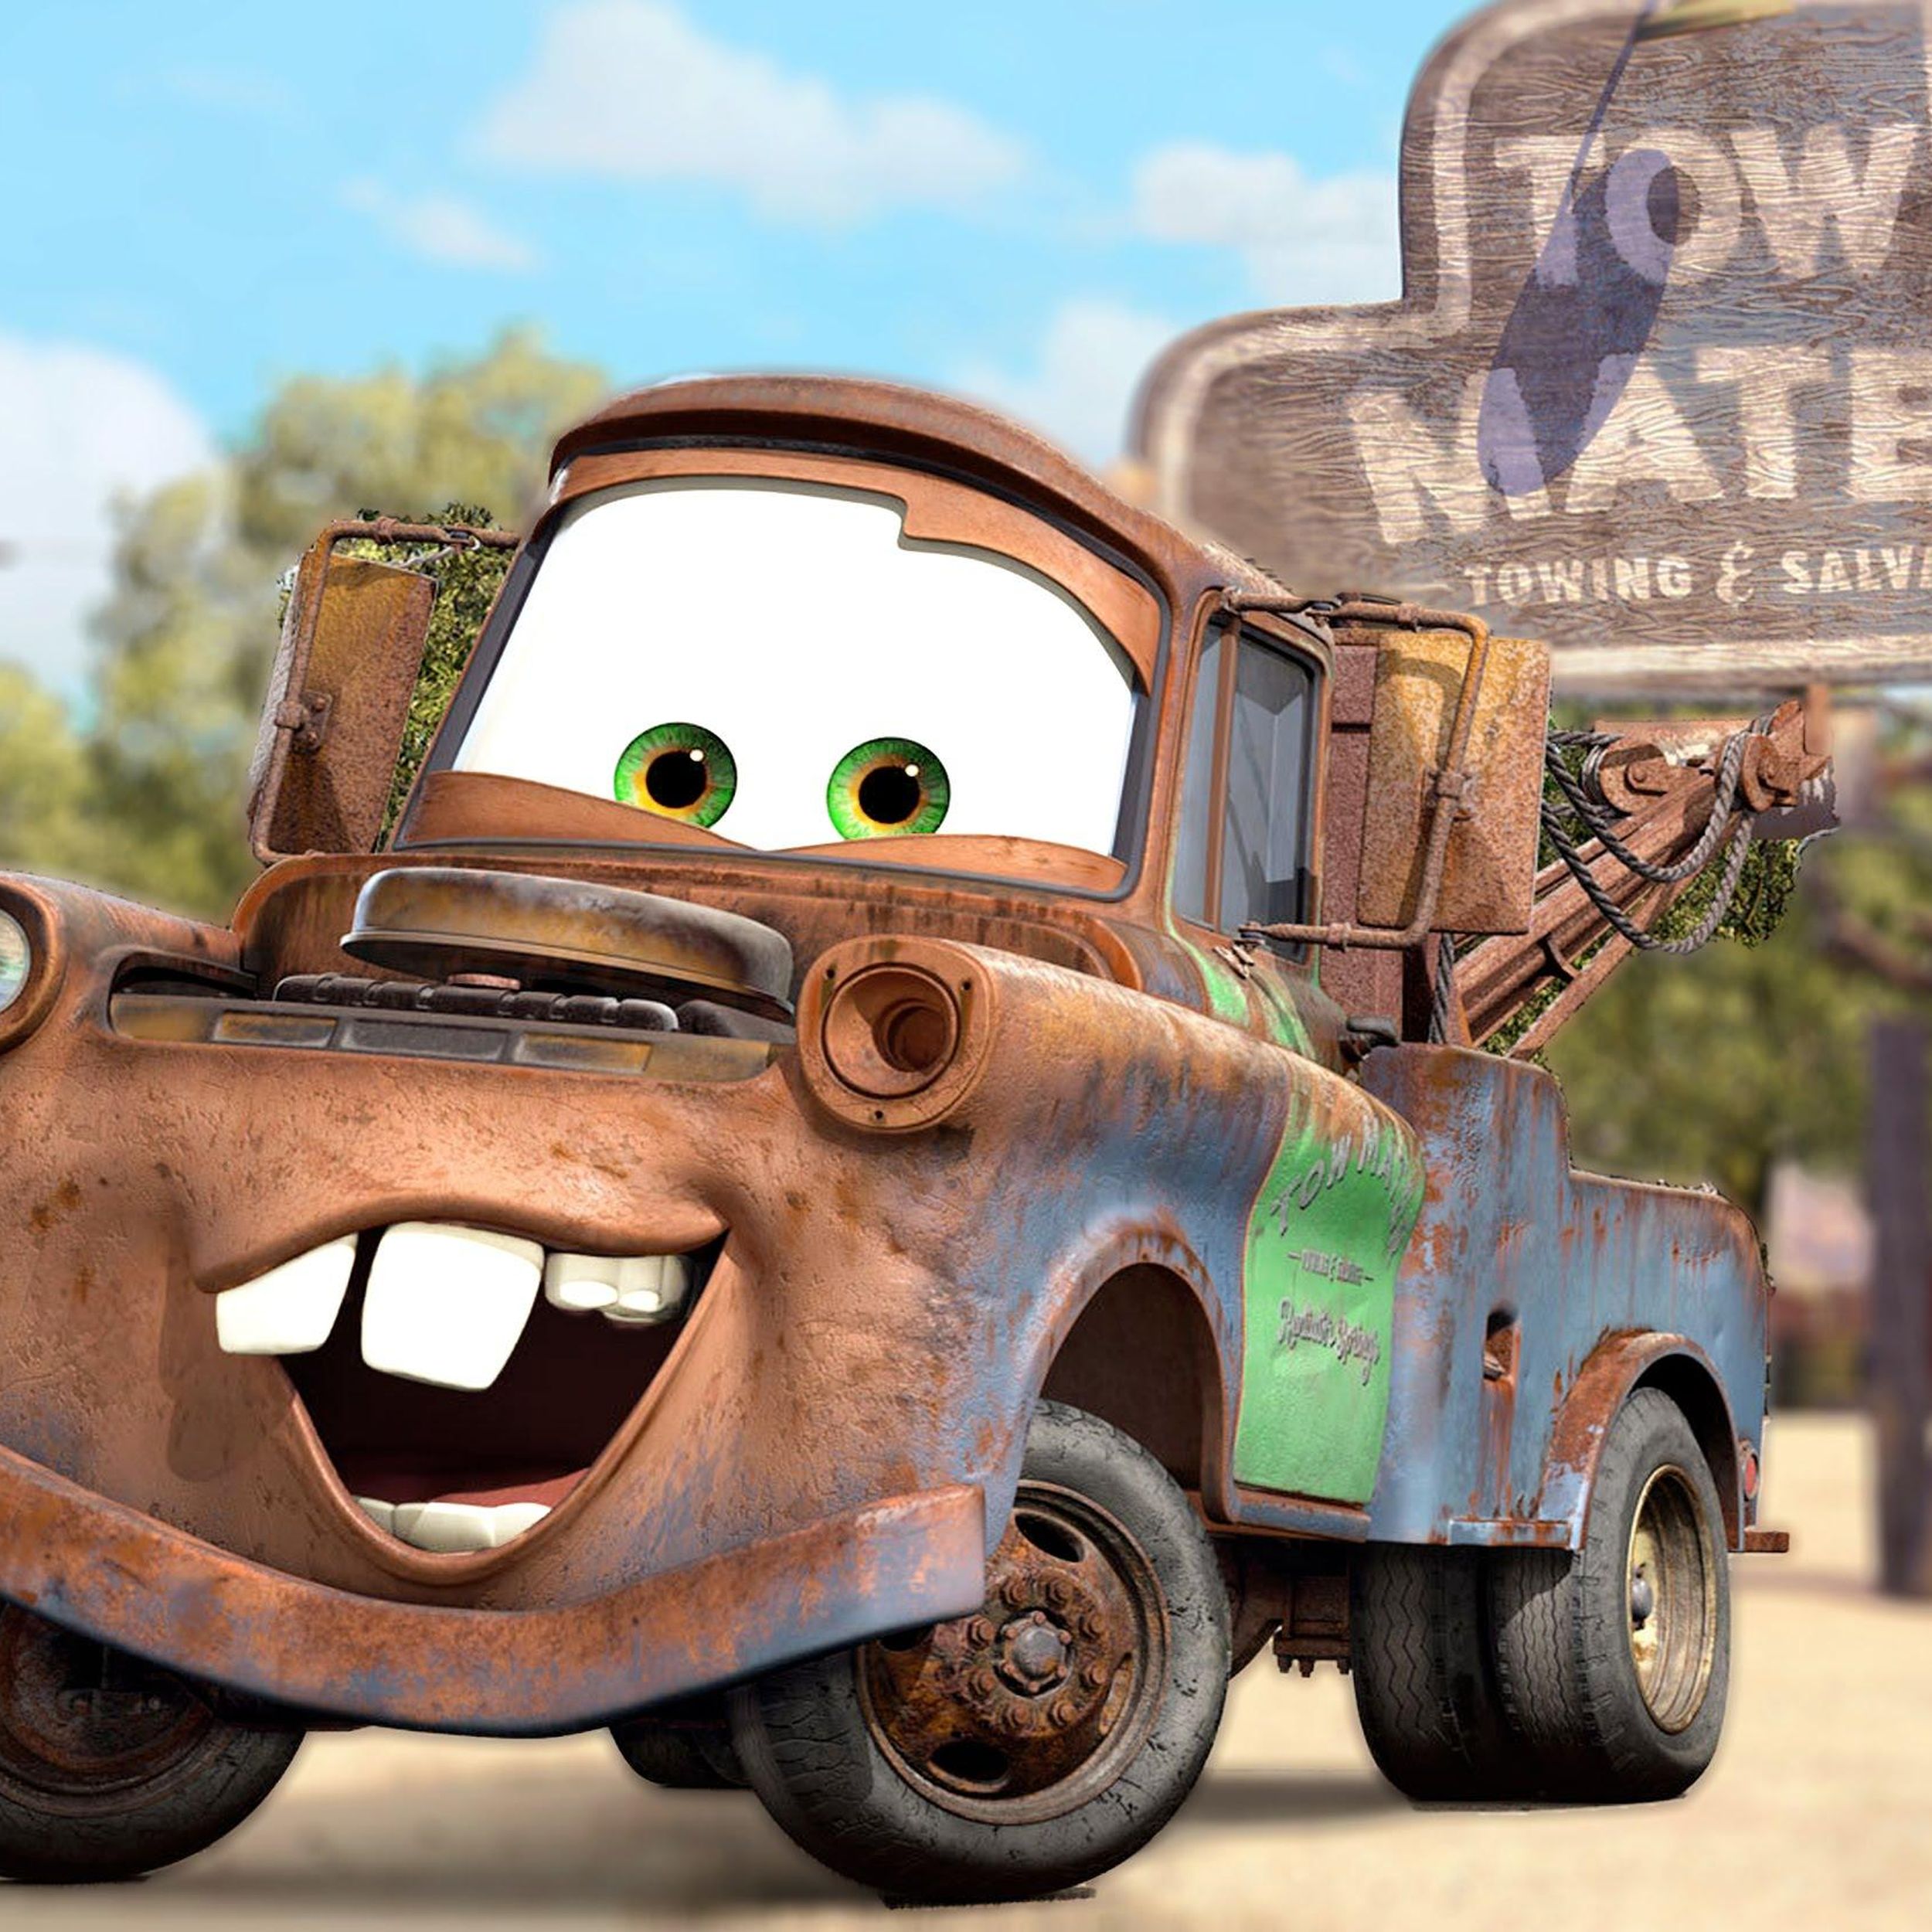 Larry the Cable Guy takes pride in being part of 'Cars' franchise